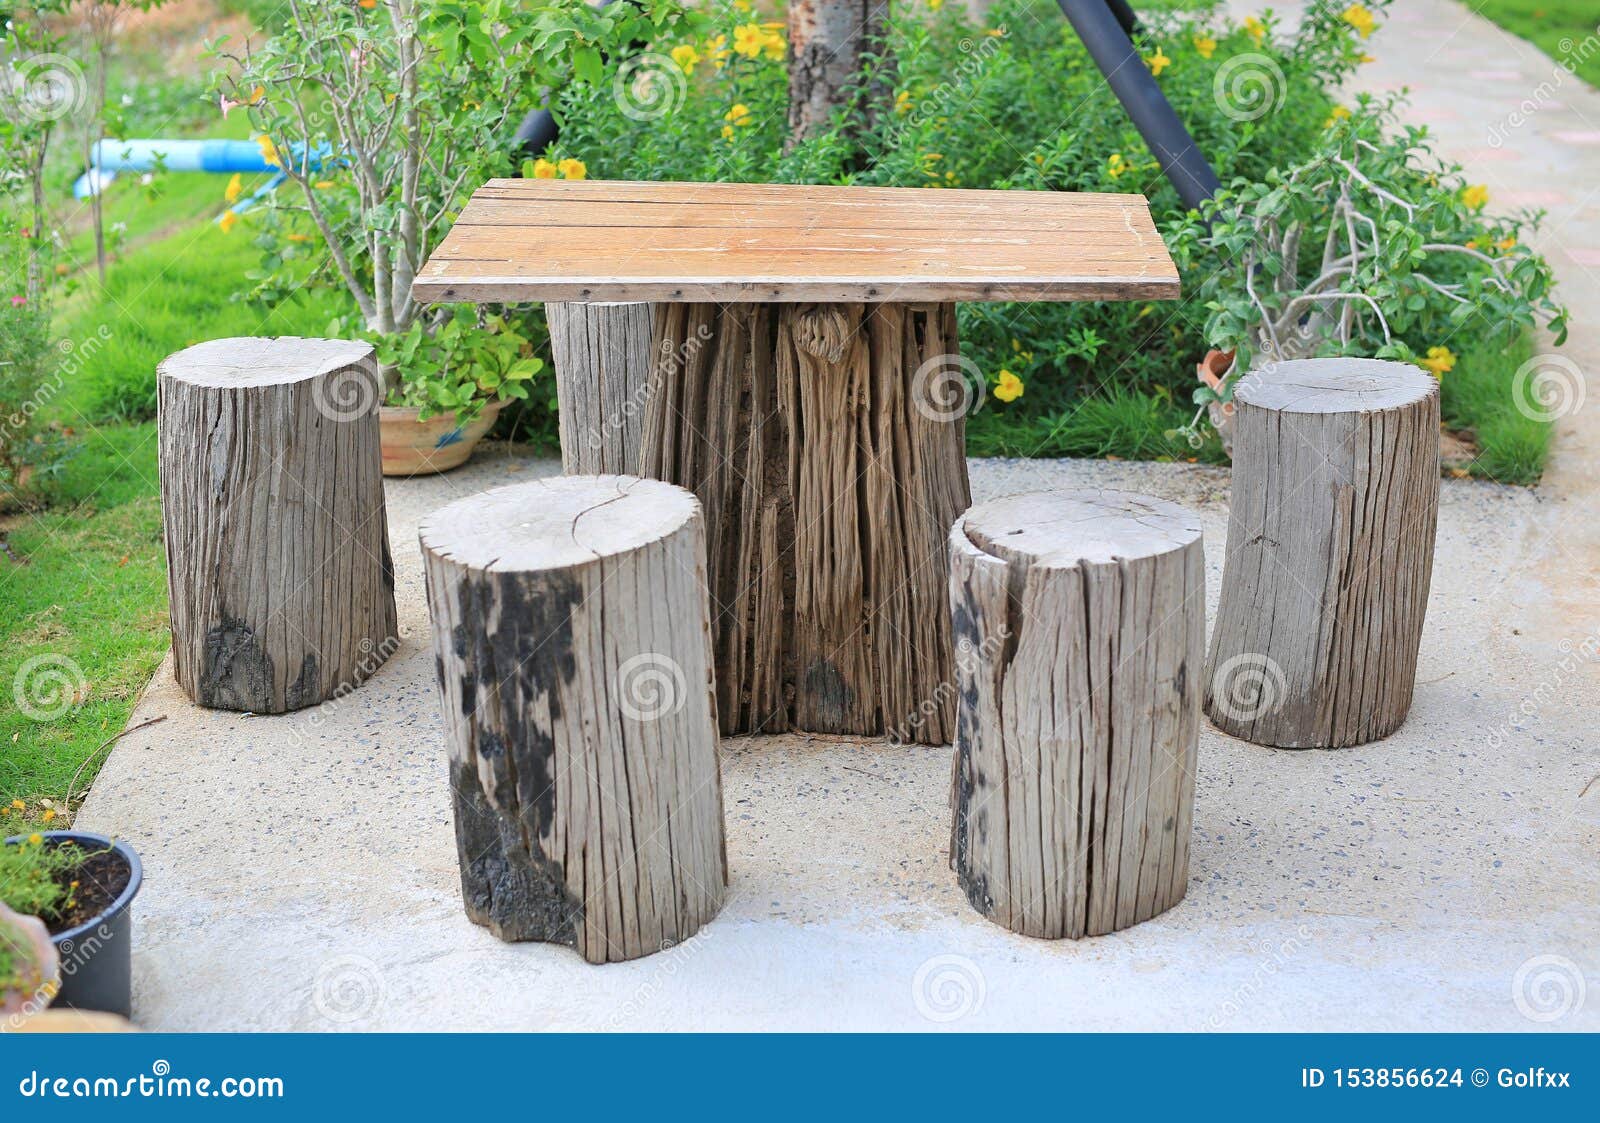 Wood Table And Chair Set In Garden Garden Furniture Made From